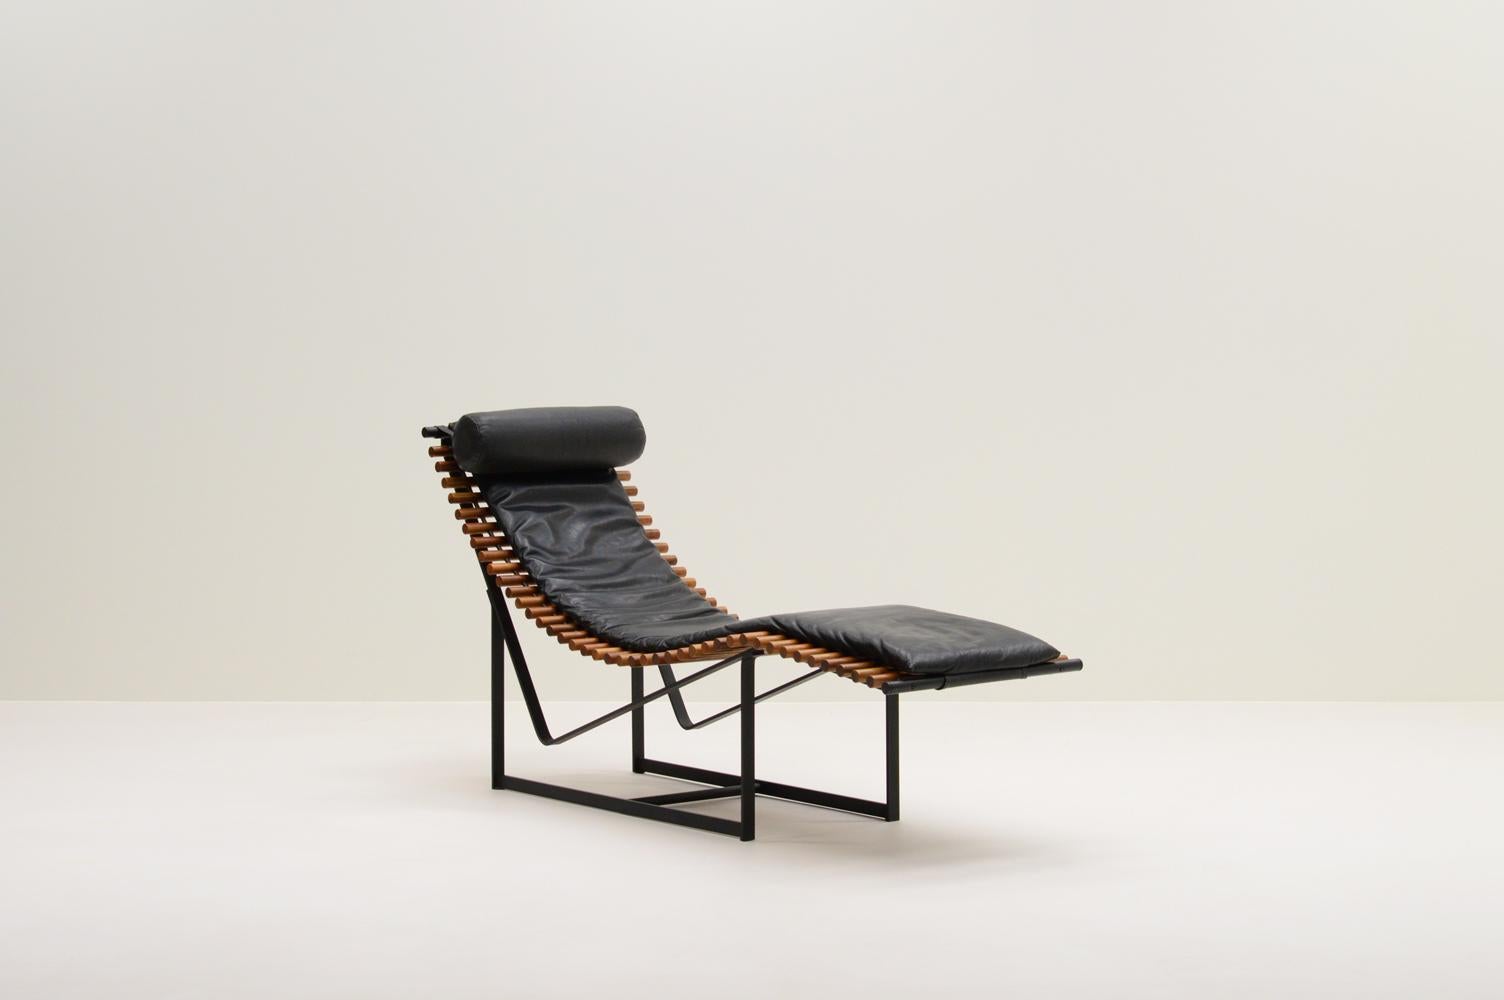 “Spine back” lounge chair by Peter Strassl, 1970s Germany. Designed for the Kunsthaus Munich exhibition in 1978. Black steel frame with solid wooden “spine” seat and black perforated leather cushions. Very comfortable due to the hanging “spines” and